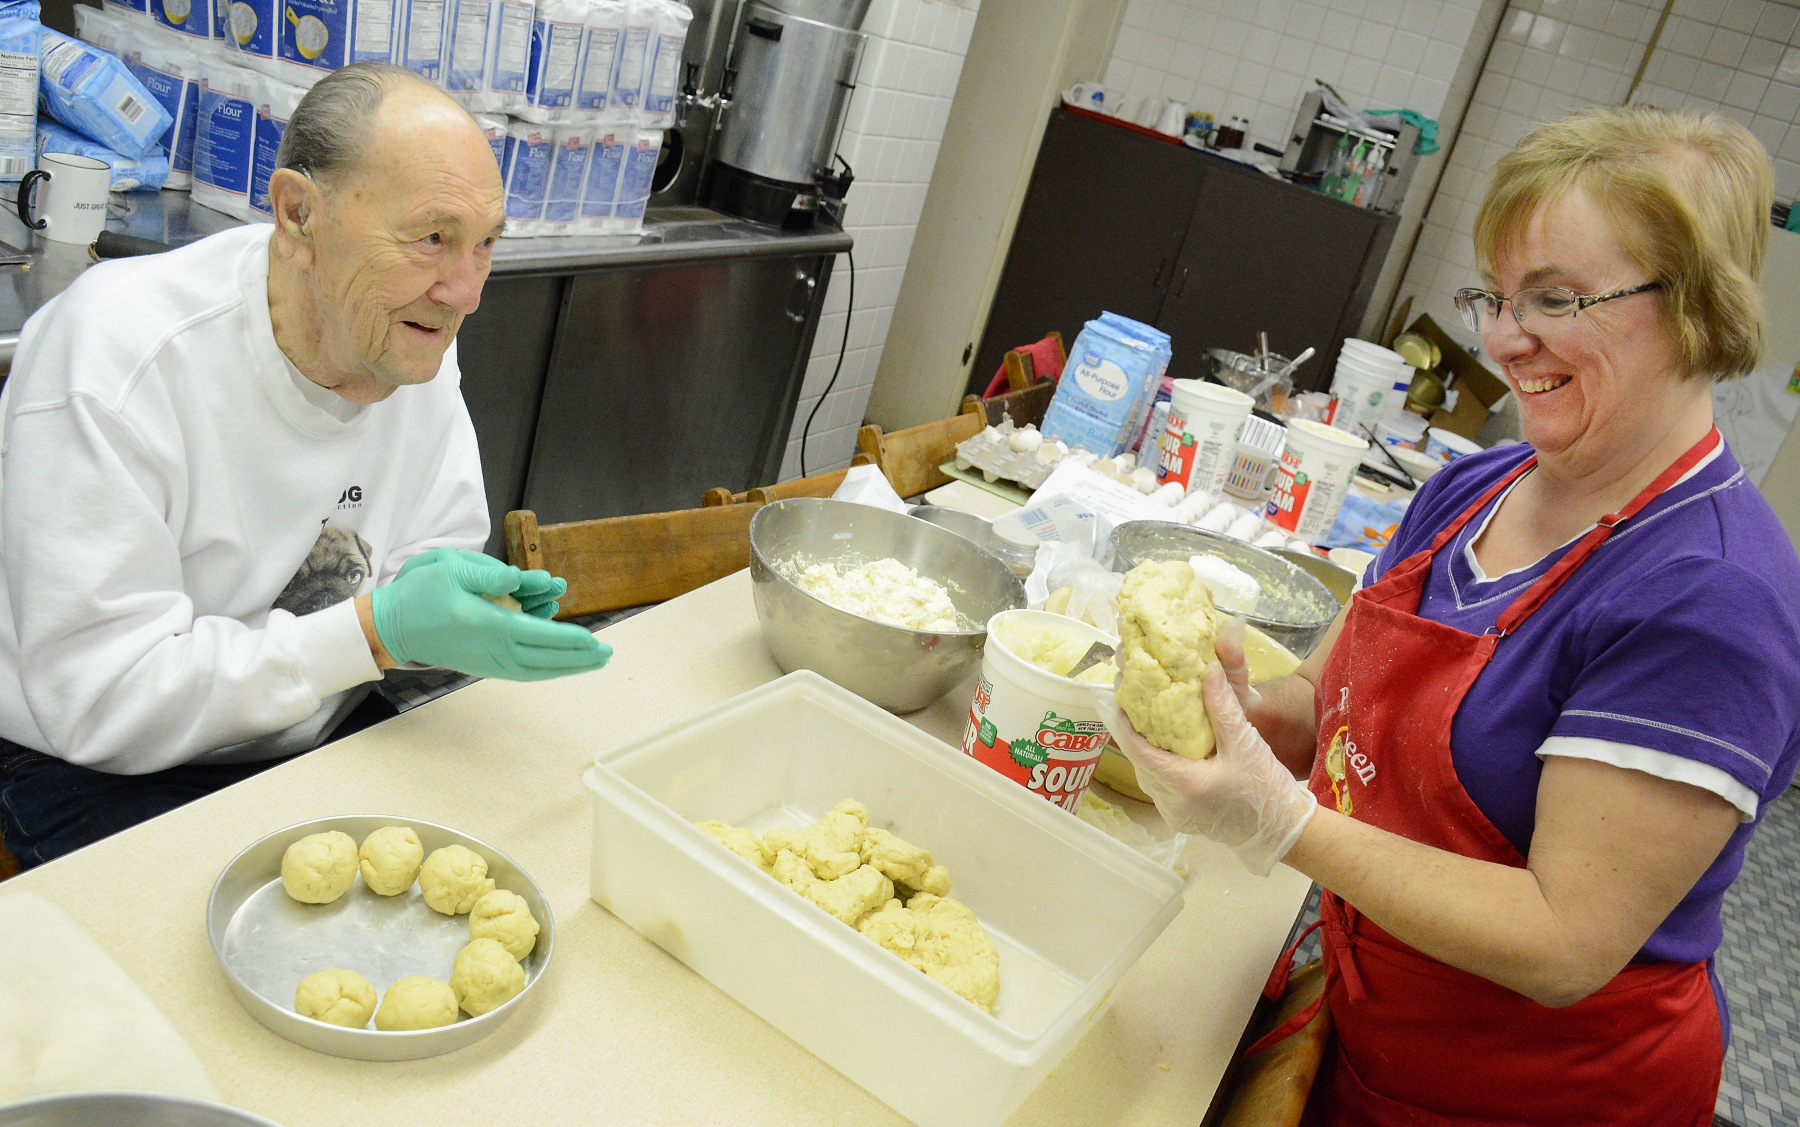 Diane Czajka and fellow St. John Kanty parishioner Ben Lisiecki form the dough which will become cheese pierogi made by volunteers and parishioners in the St John Kanty kitchen. Czajka, who leads the culinary fund raising effort for the historic Eastside church, has been a parishioner for 58 years, and Lisiecki for 61 years. 
Dan Cappellazzo/Staff photographer